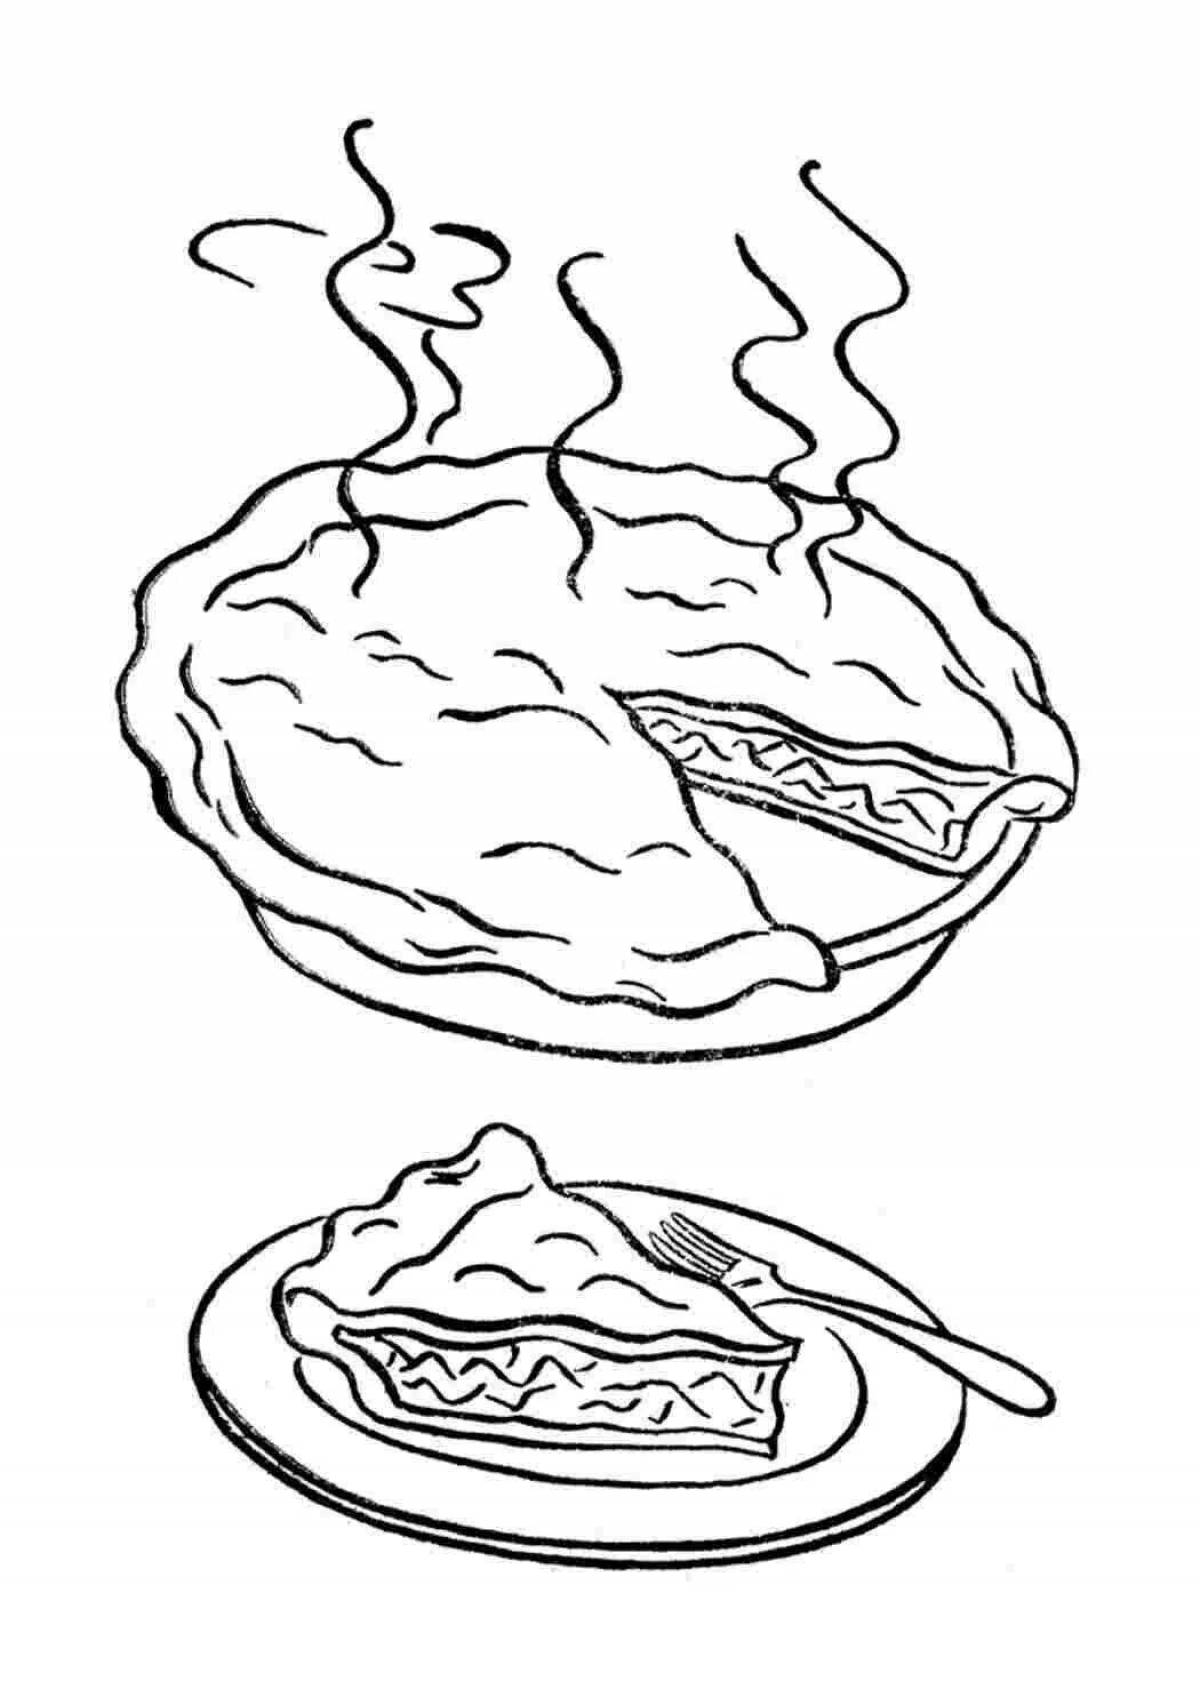 Great casserole coloring page